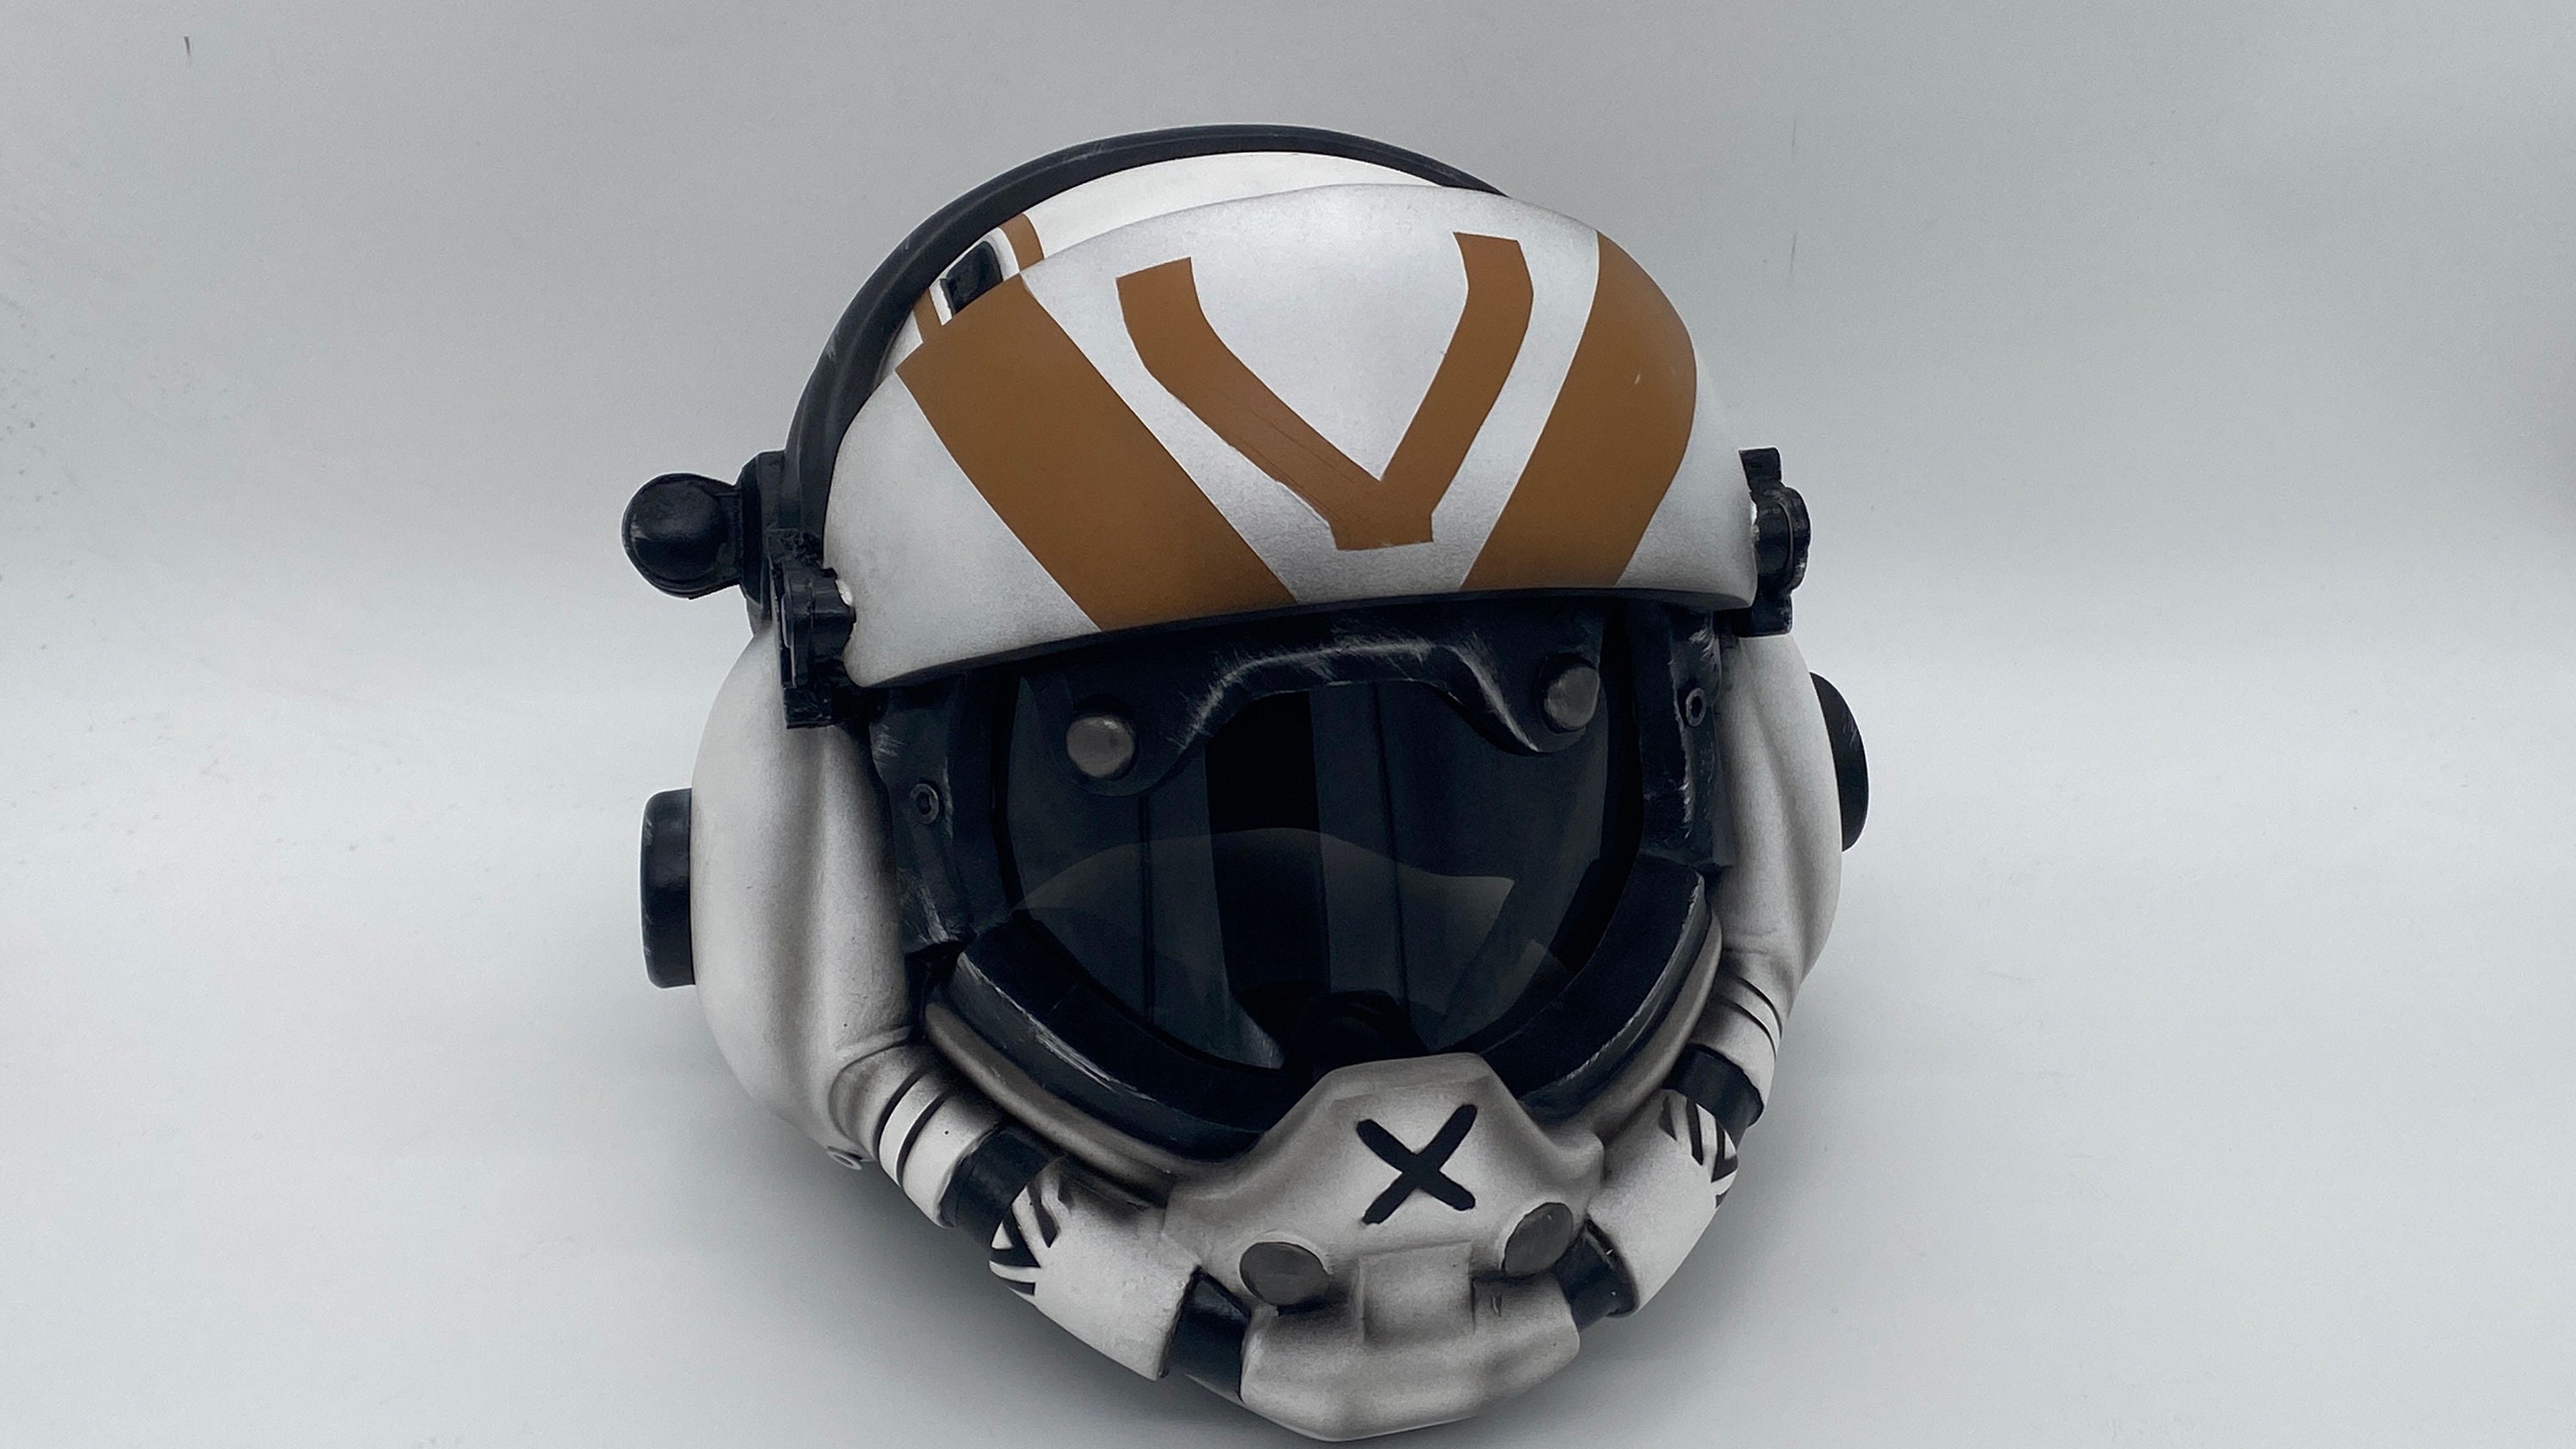 Pilot TitanFall VIPER very durable for Cosplay or - Etsy